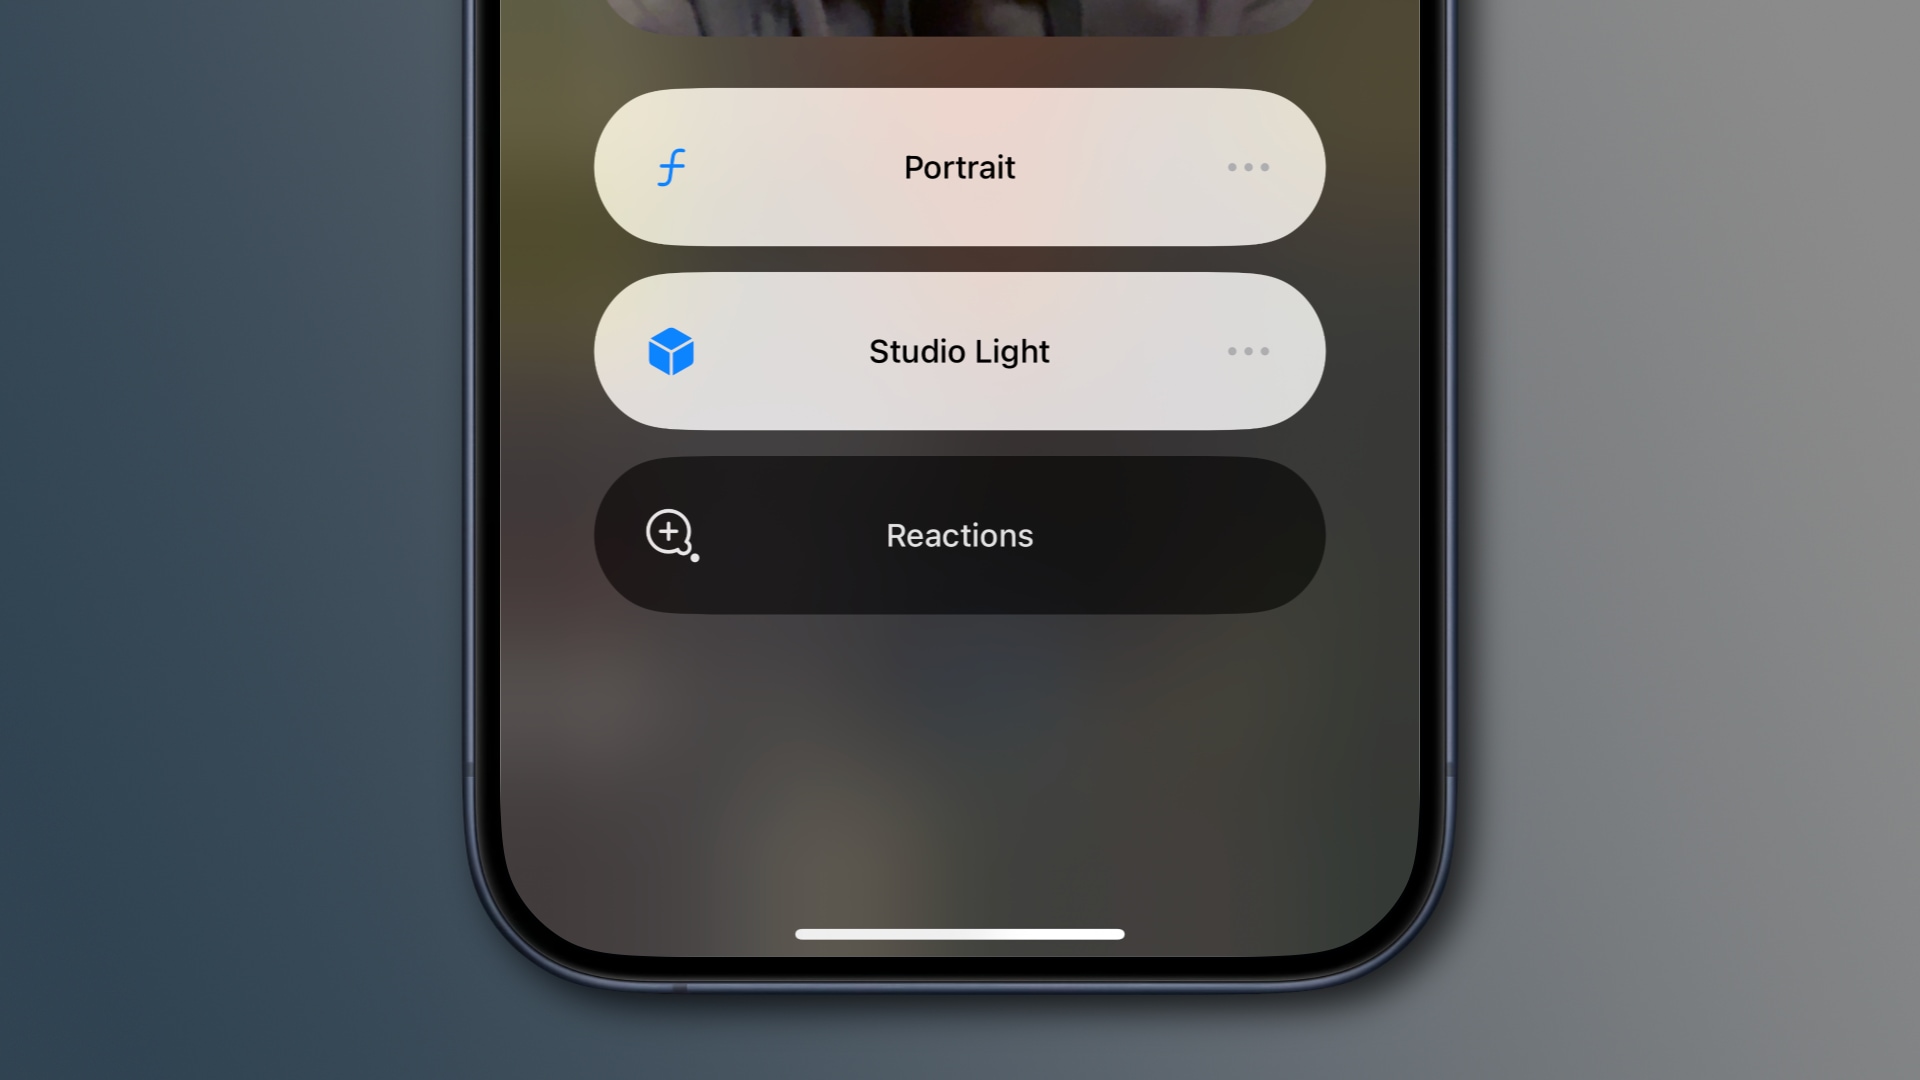 The Video Effects menu in the iPhone's Control Center with the Reactions option disabled